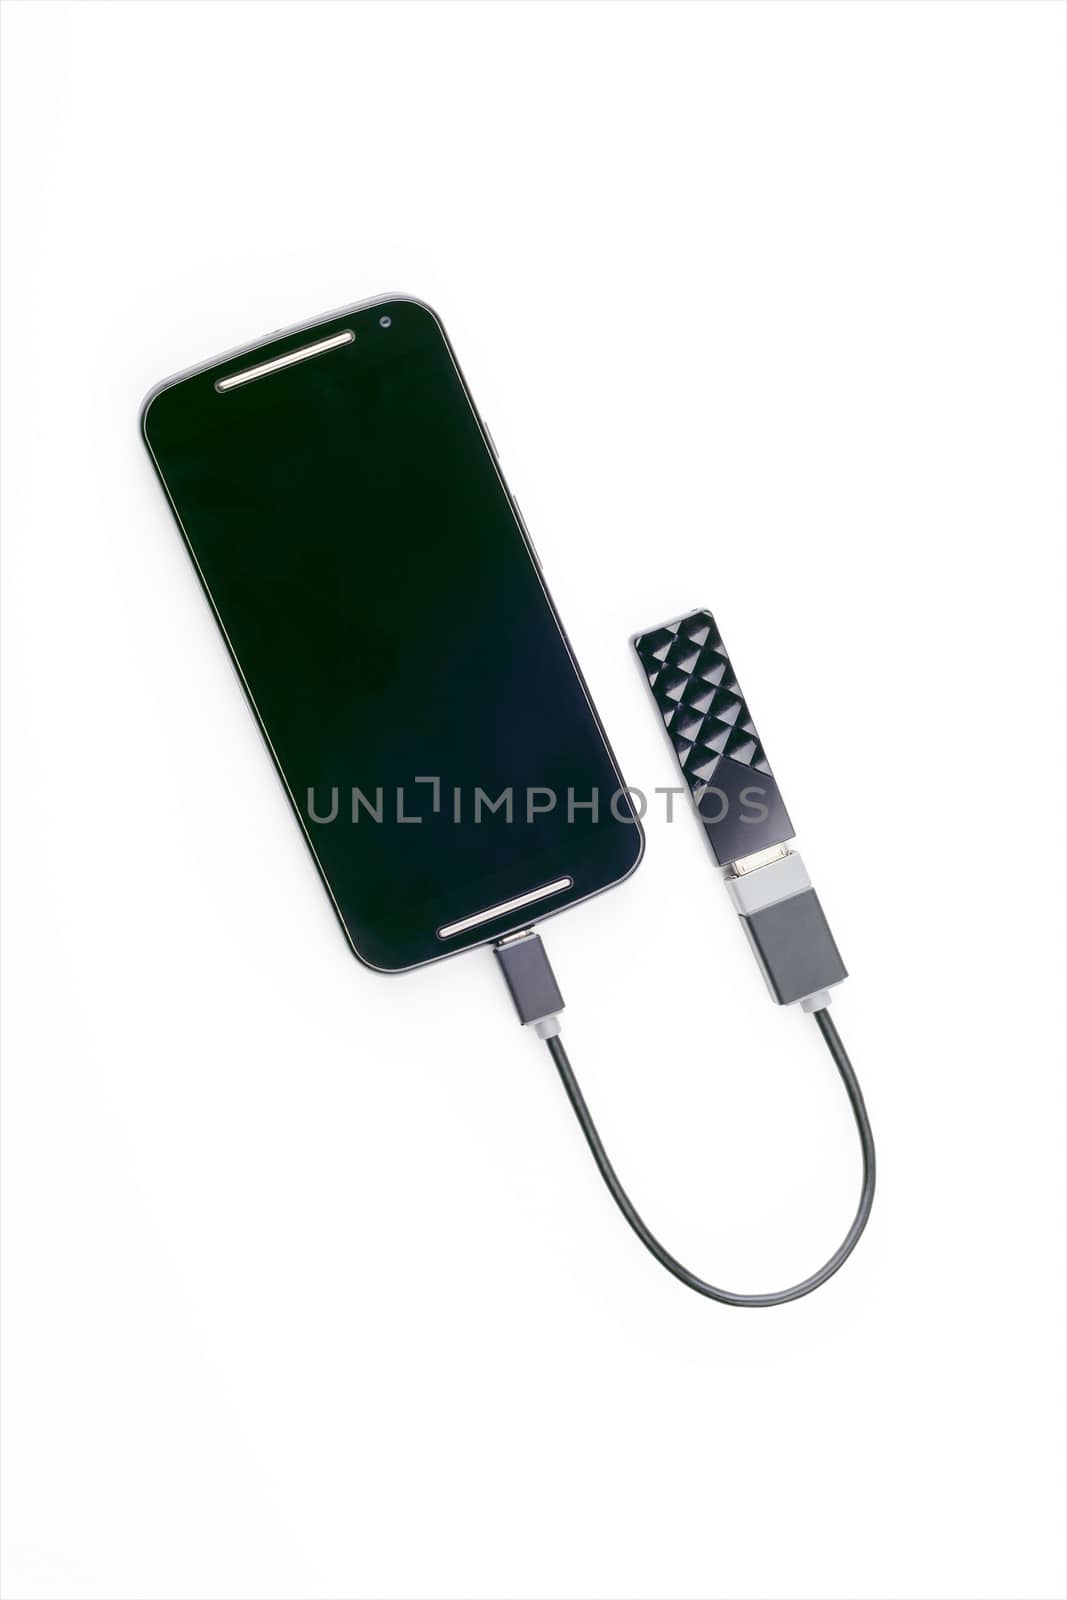 Black smartphone connected to a USB key with an OTG cable. Isolated on white background